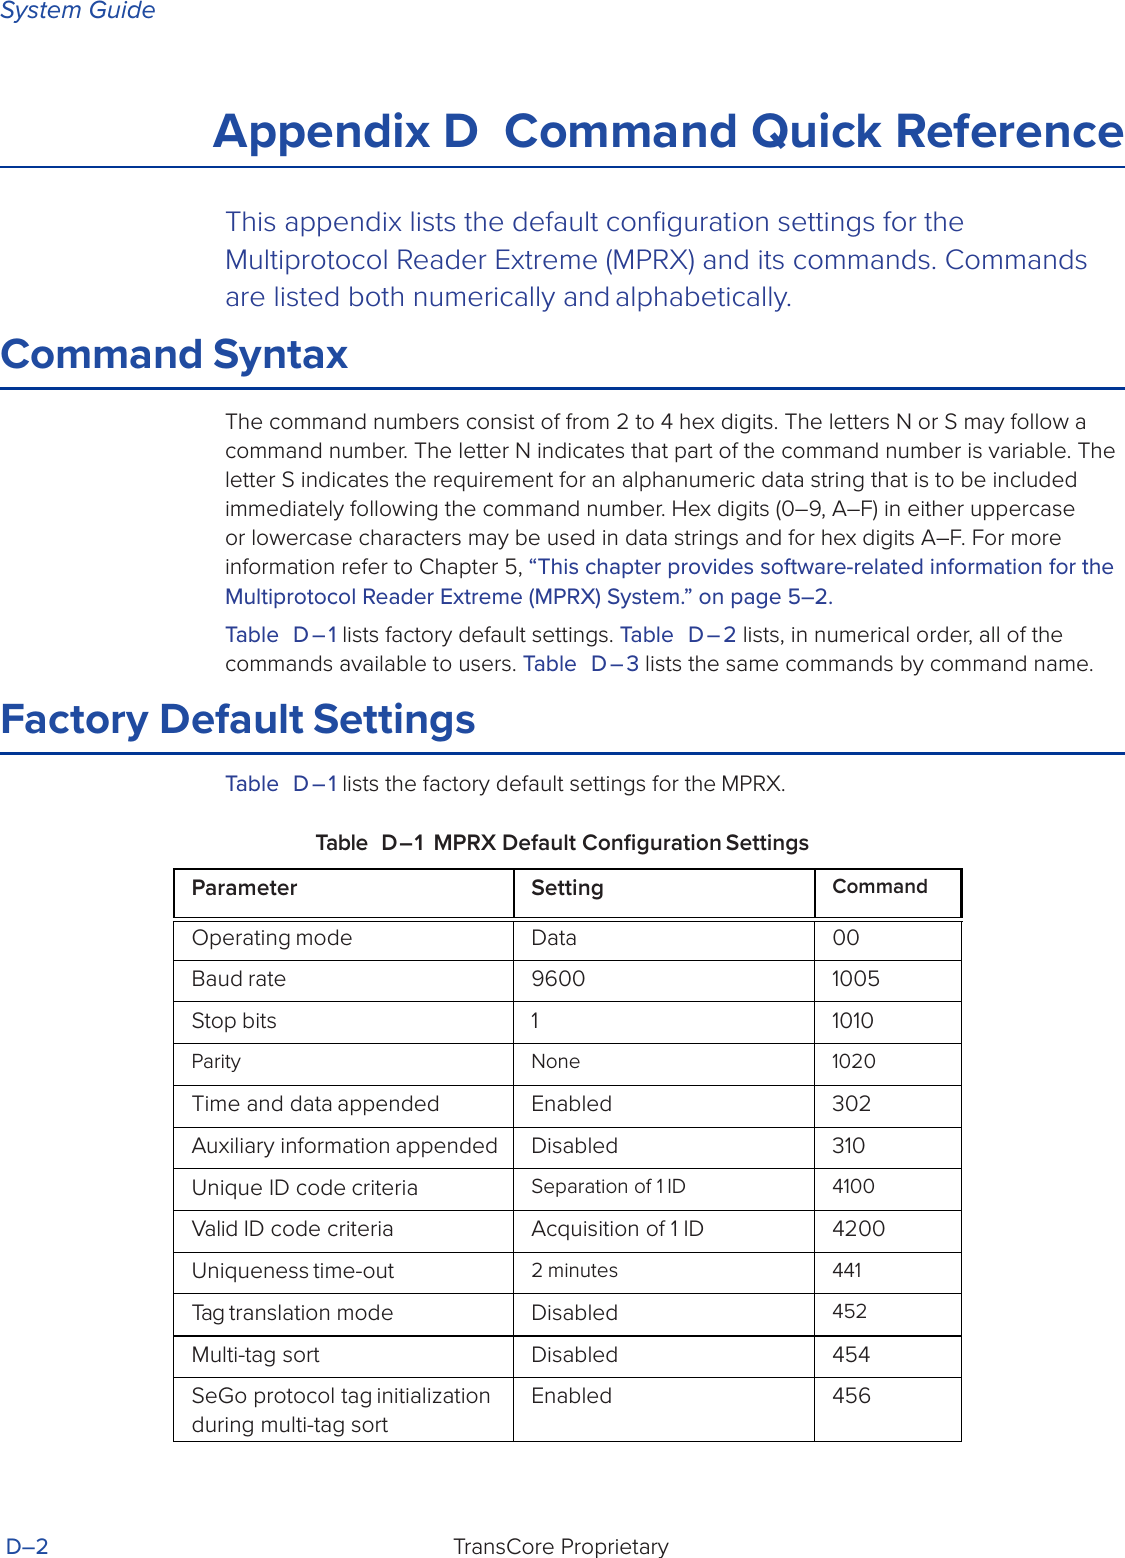 System GuideTransCore Proprietary D–2Appendix D  Command Quick ReferenceThis appendix lists the default conﬁguration settings for the Multiprotocol Reader Extreme (MPRX) and its commands. Commands are listed both numerically and alphabetically.Command SyntaxThe command numbers consist of from 2 to 4 hex digits. The letters N or S may follow a command number. The letter N indicates that part of the command number is variable. The letter S indicates the requirement for an alphanumeric data string that is to be included immediately following the command number. Hex digits (0–9, A–F) in either uppercase or lowercase characters may be used in data strings and for hex digits A–F. For more information refer to Chapter 5, “This chapter provides software-related information for the Multiprotocol Reader Extreme (MPRX) System.” on page 5–2.Table D – 1 lists factory default settings. Table D – 2 lists, in numerical order, all of the commands available to users. Table D – 3 lists the same commands by command name.Factory Default SettingsTable D – 1 lists the factory default settings for the MPRX.Table D – 1 MPRX Default Conﬁguration SettingsParameter Setting CommandOperating mode Data 00Baud rate 9600 1005Stop bits 1 1010Parity None 1020Time and data appended Enabled 302Auxiliary information appended Disabled 310Unique ID code criteria Separation of 1 ID 4100Valid ID code criteria Acquisition of 1 ID 4200Uniqueness time-out 2 minutes 441Tag translation mode Disabled 452Multi-tag sort Disabled 454SeGo protocol tag initialization during multi-tag sortEnabled 456